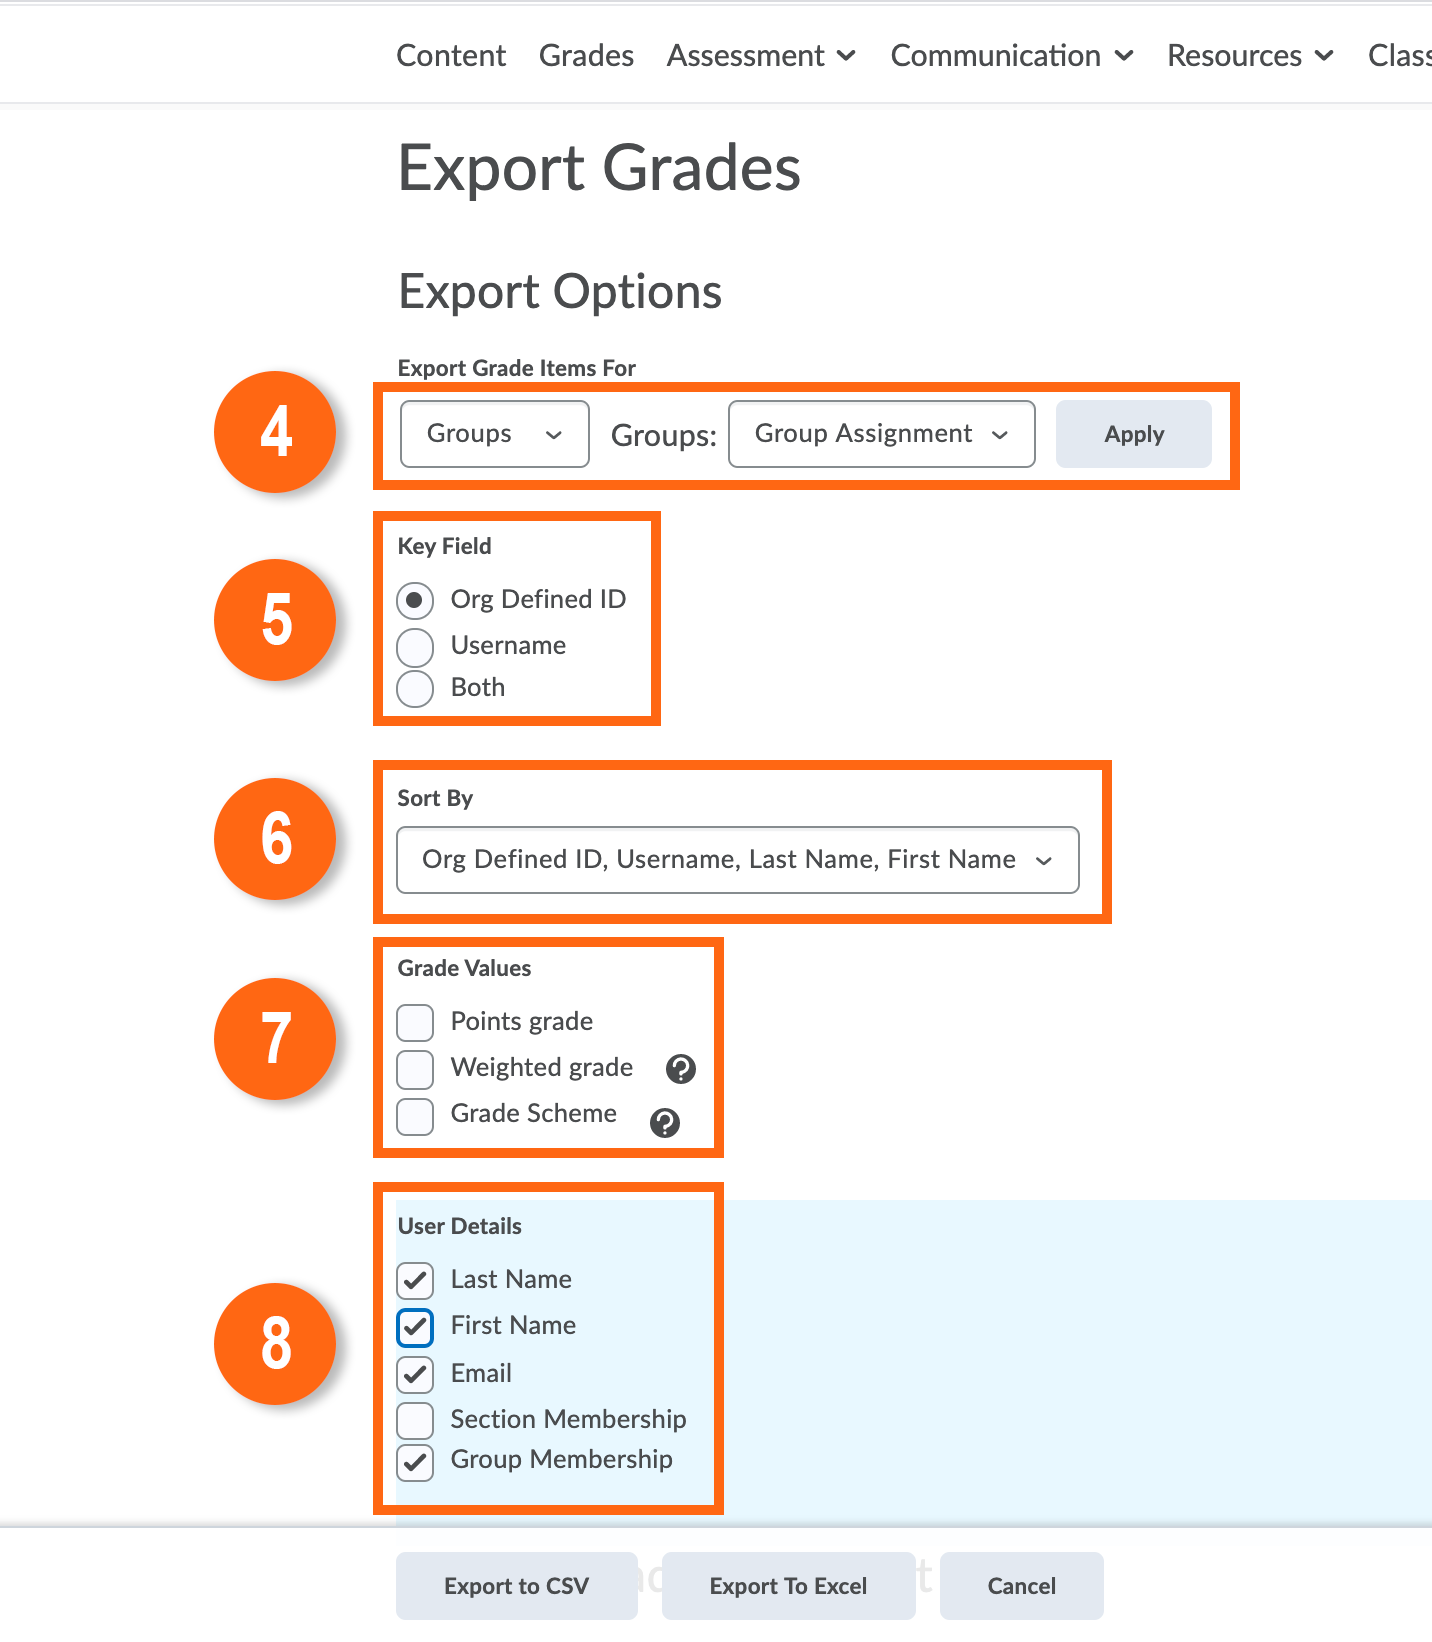 Options within the grades menu that are selected from 